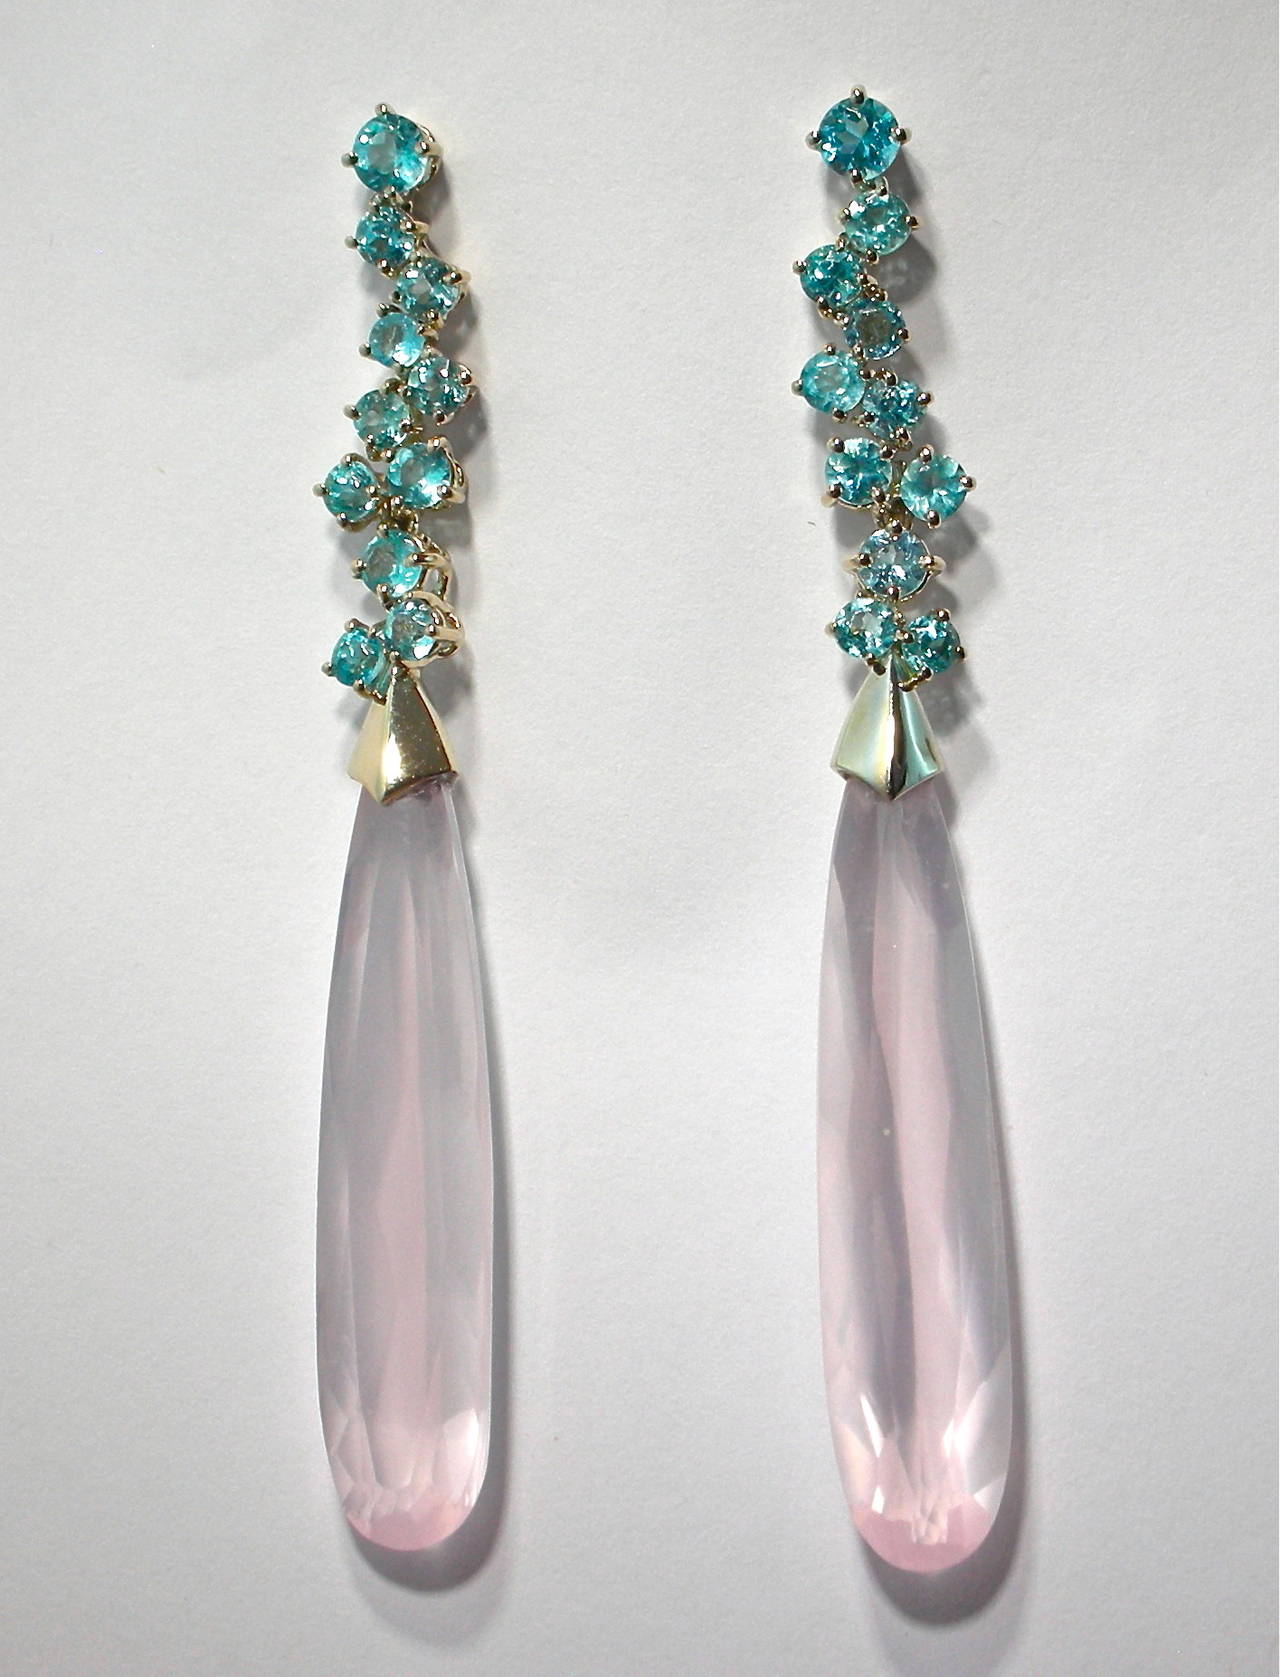 Jona design collection, pair of 18 karat white gold dangle pendant earrings featuring two elongated pink quartz faceted drops weighing 35,40 carats and     4,23 carats of round cut Apatite. Hand crafted in Italy by Jona
All Jona jewelry is new and